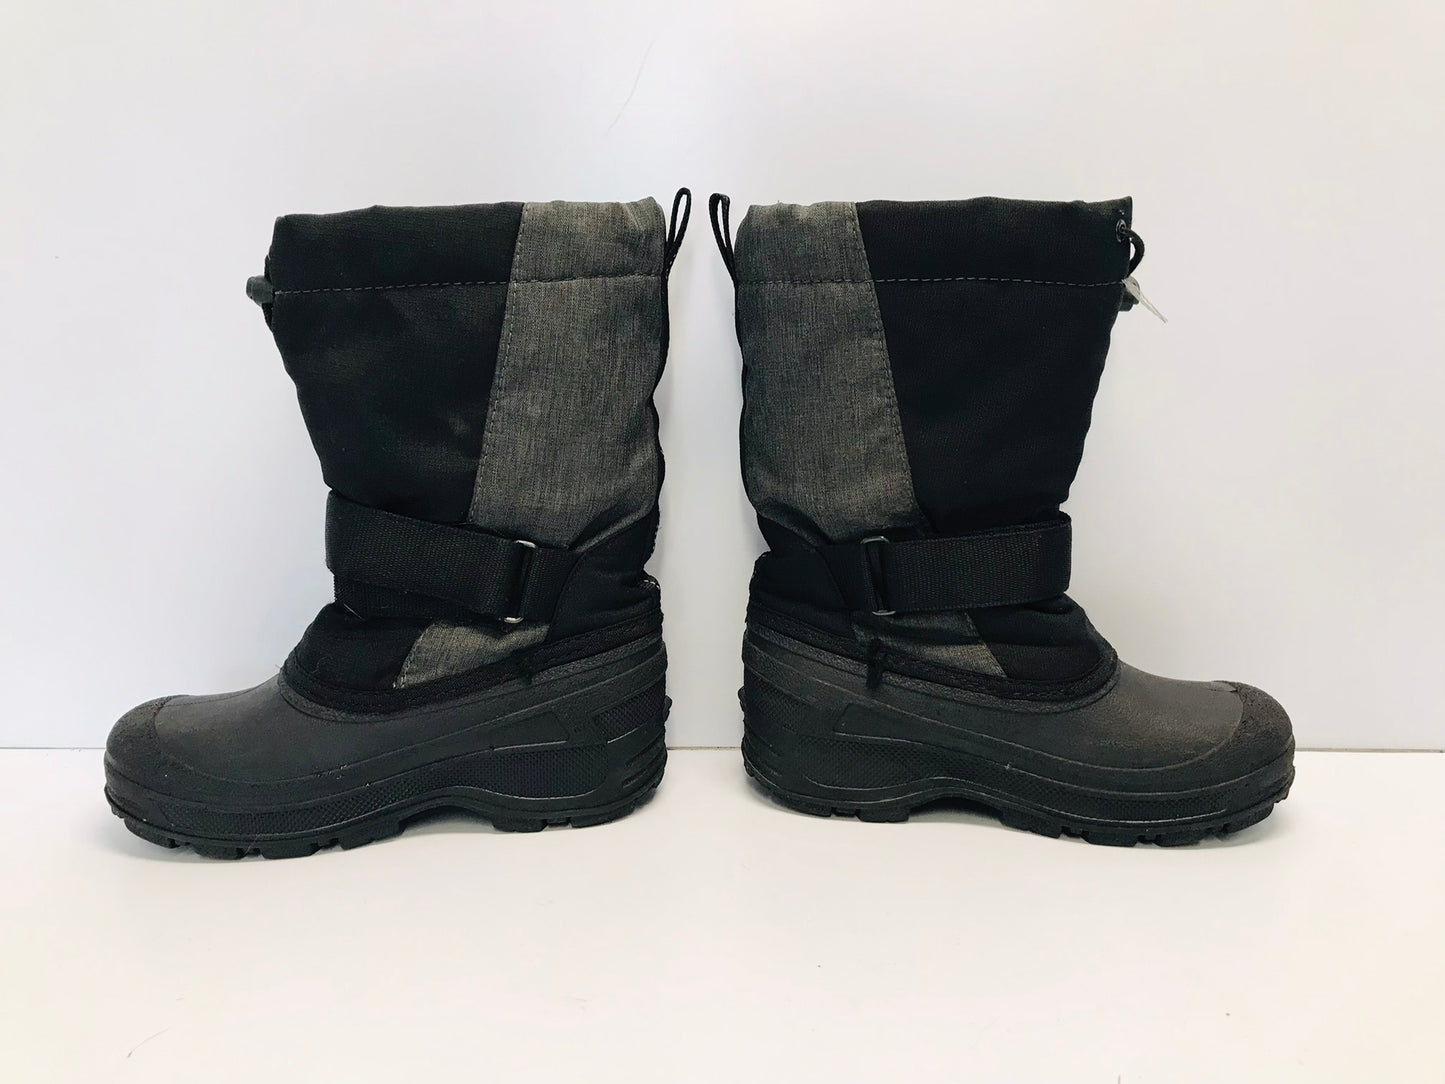 Winter Boots Child Size 2 Canadian Waterproof With Liners Black Grey Excellent